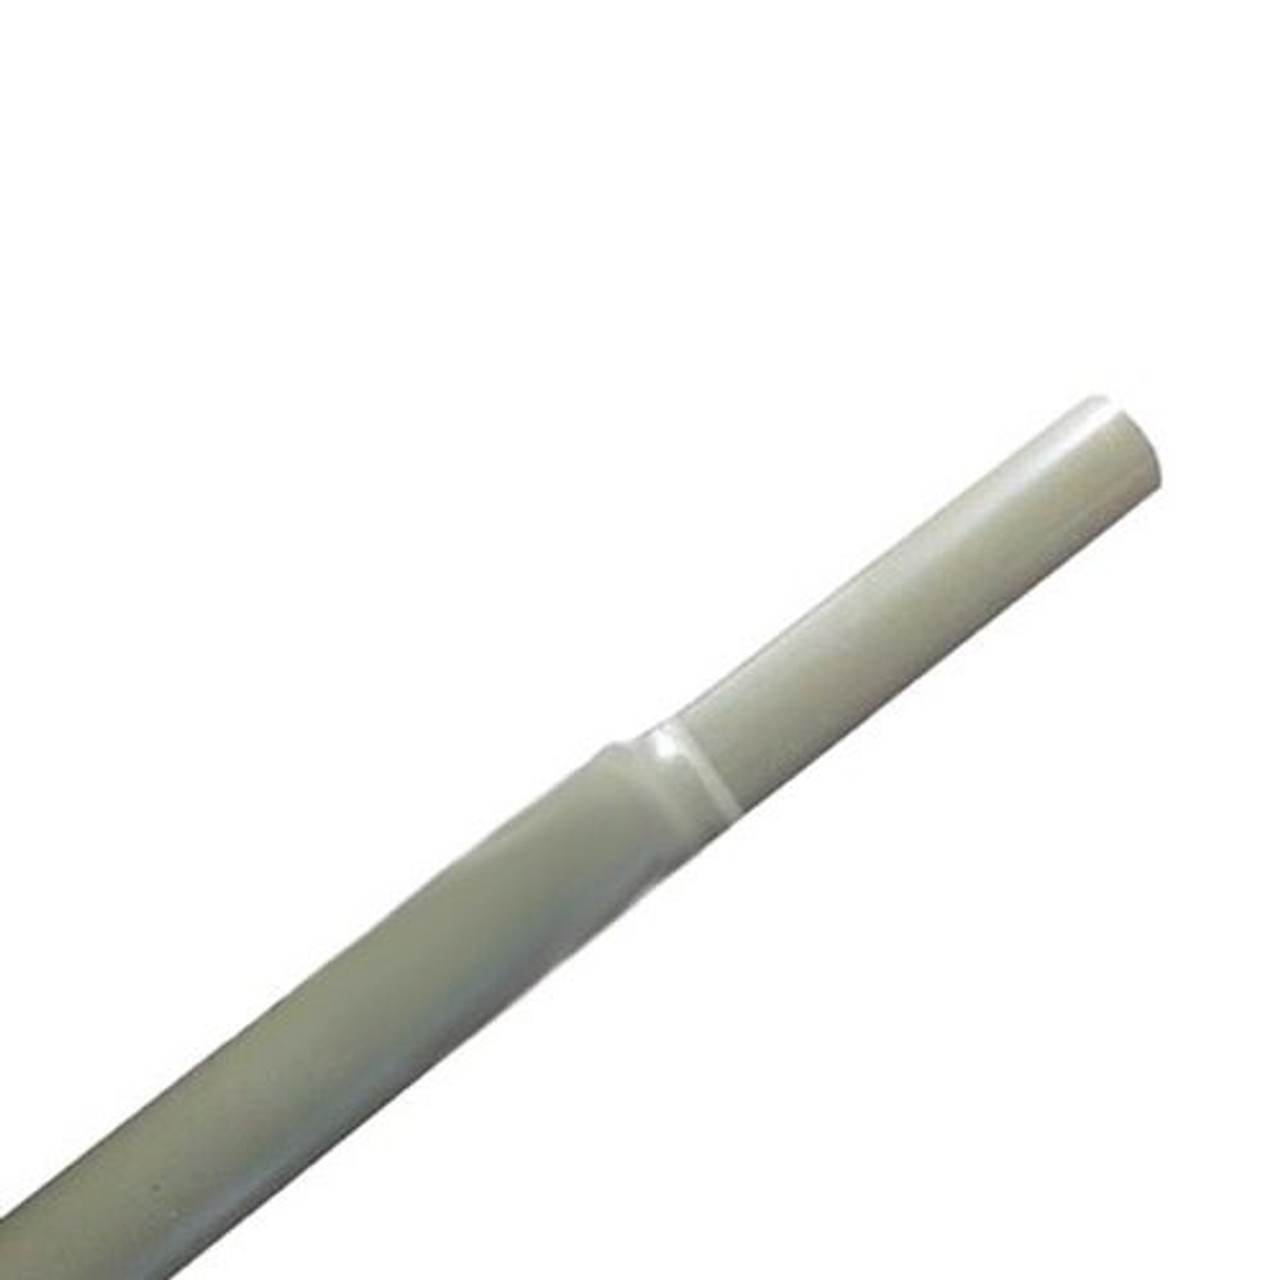 Philips Steel Mast 5 Antenna Pipe 54" Inches Long TV Tubing 4.5 FT 20 Gauge Tubing Outdoor Rooftop Off-Air Interlocking Support